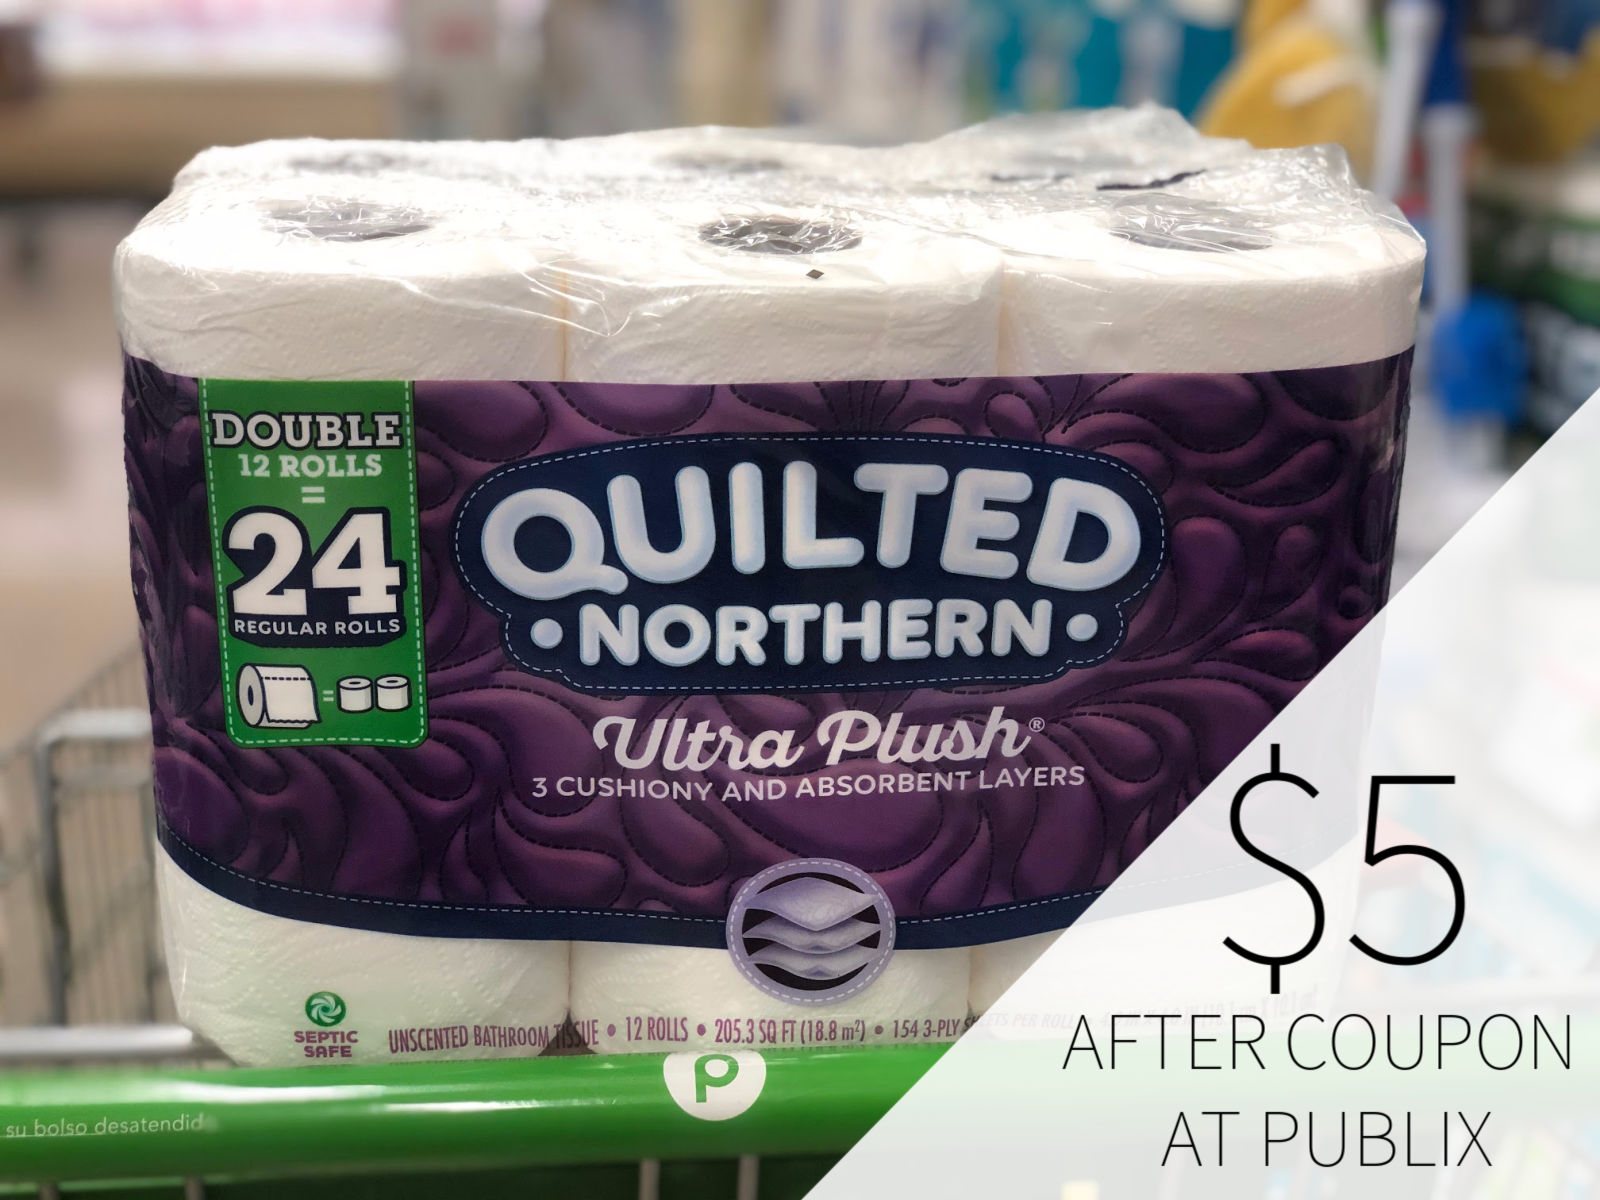 Stock Up On Quilted Northern® Bathroom Tissue At Publix & Get Ready For The Holidays! on I Heart Publix